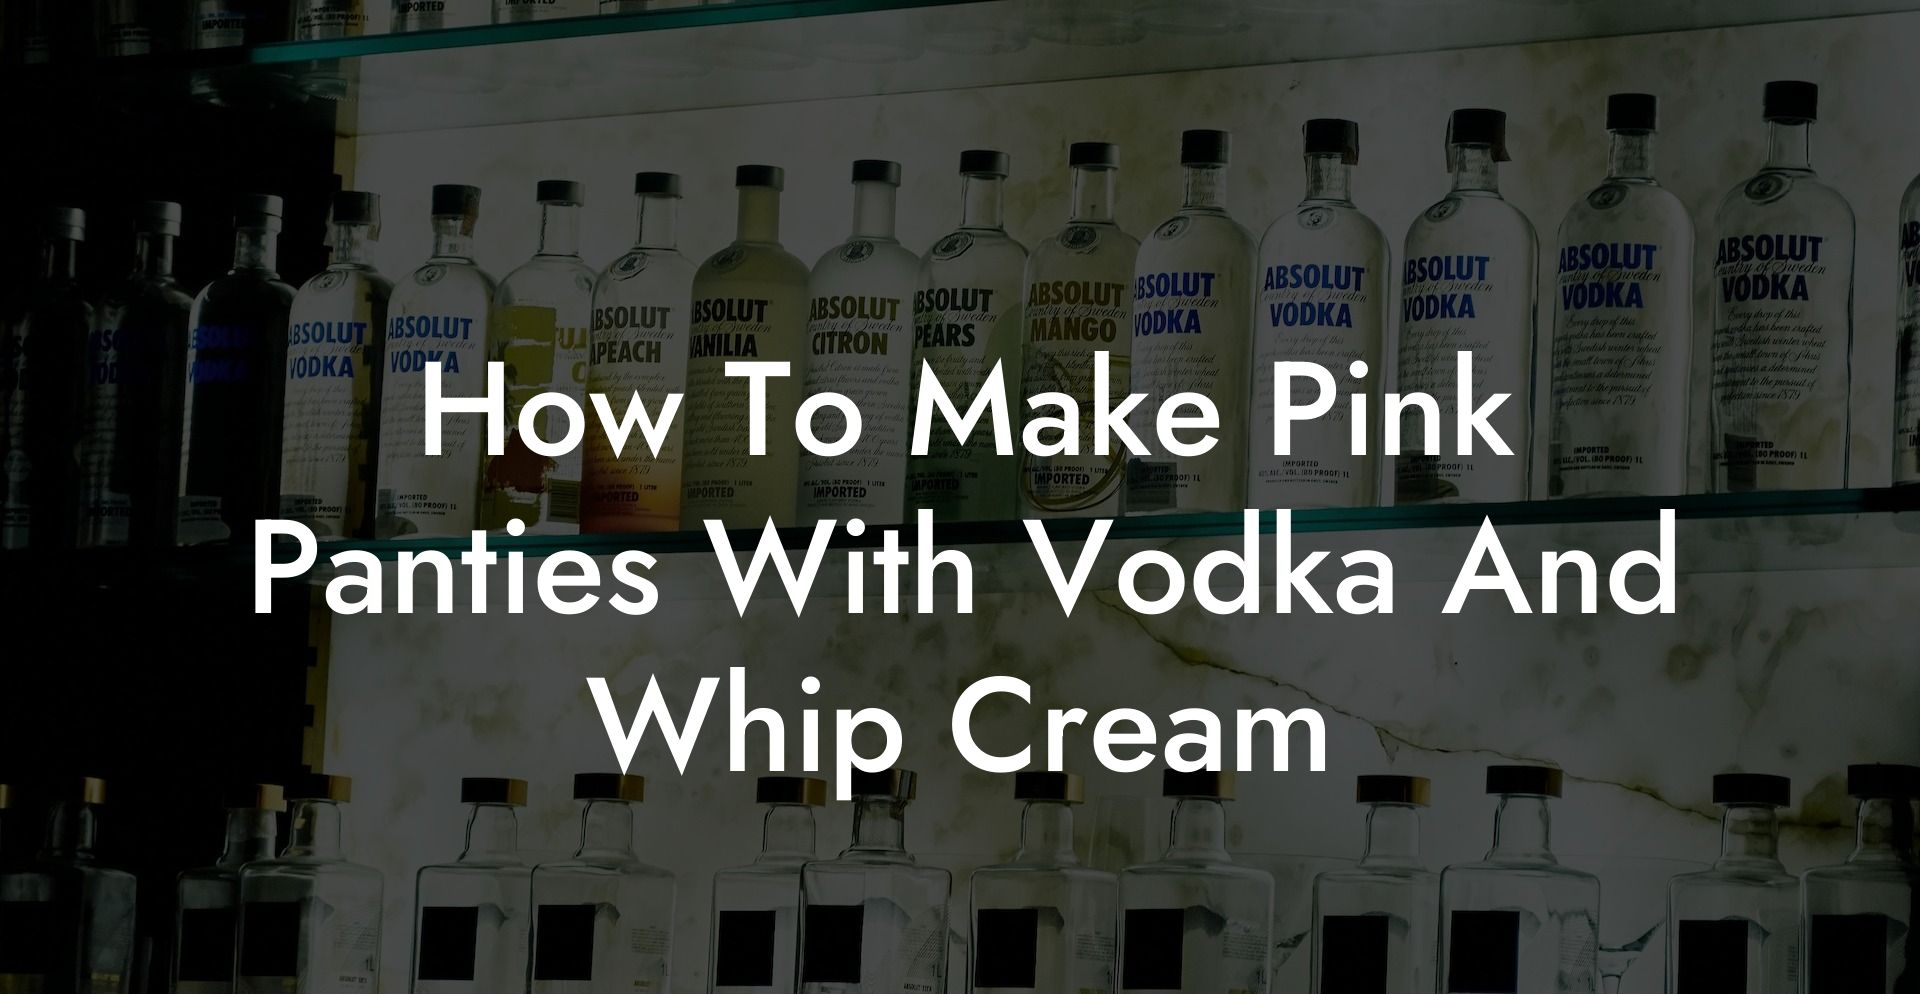 How To Make Pink Panties With Vodka And Whip Cream